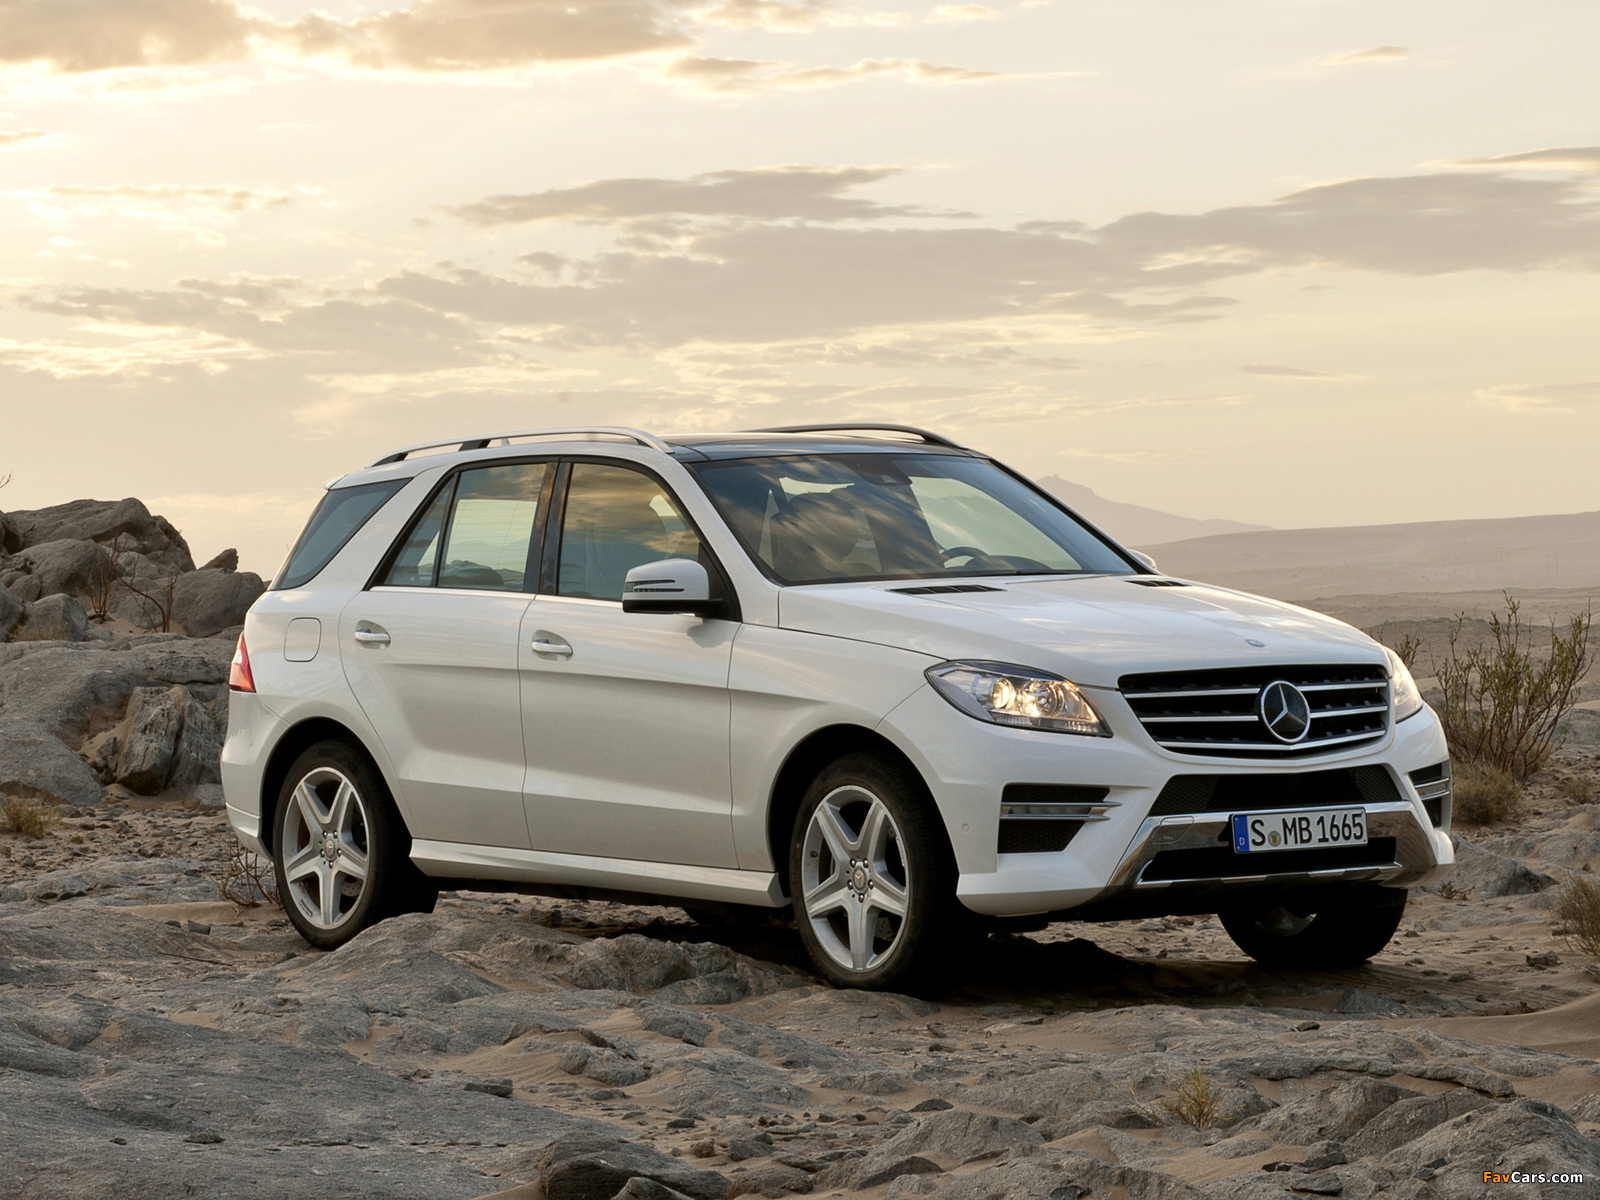 Mercedes-Benz ML 250 BlueTec AMG Sports Package (W166) 2011 pictures (1600 x 1200)